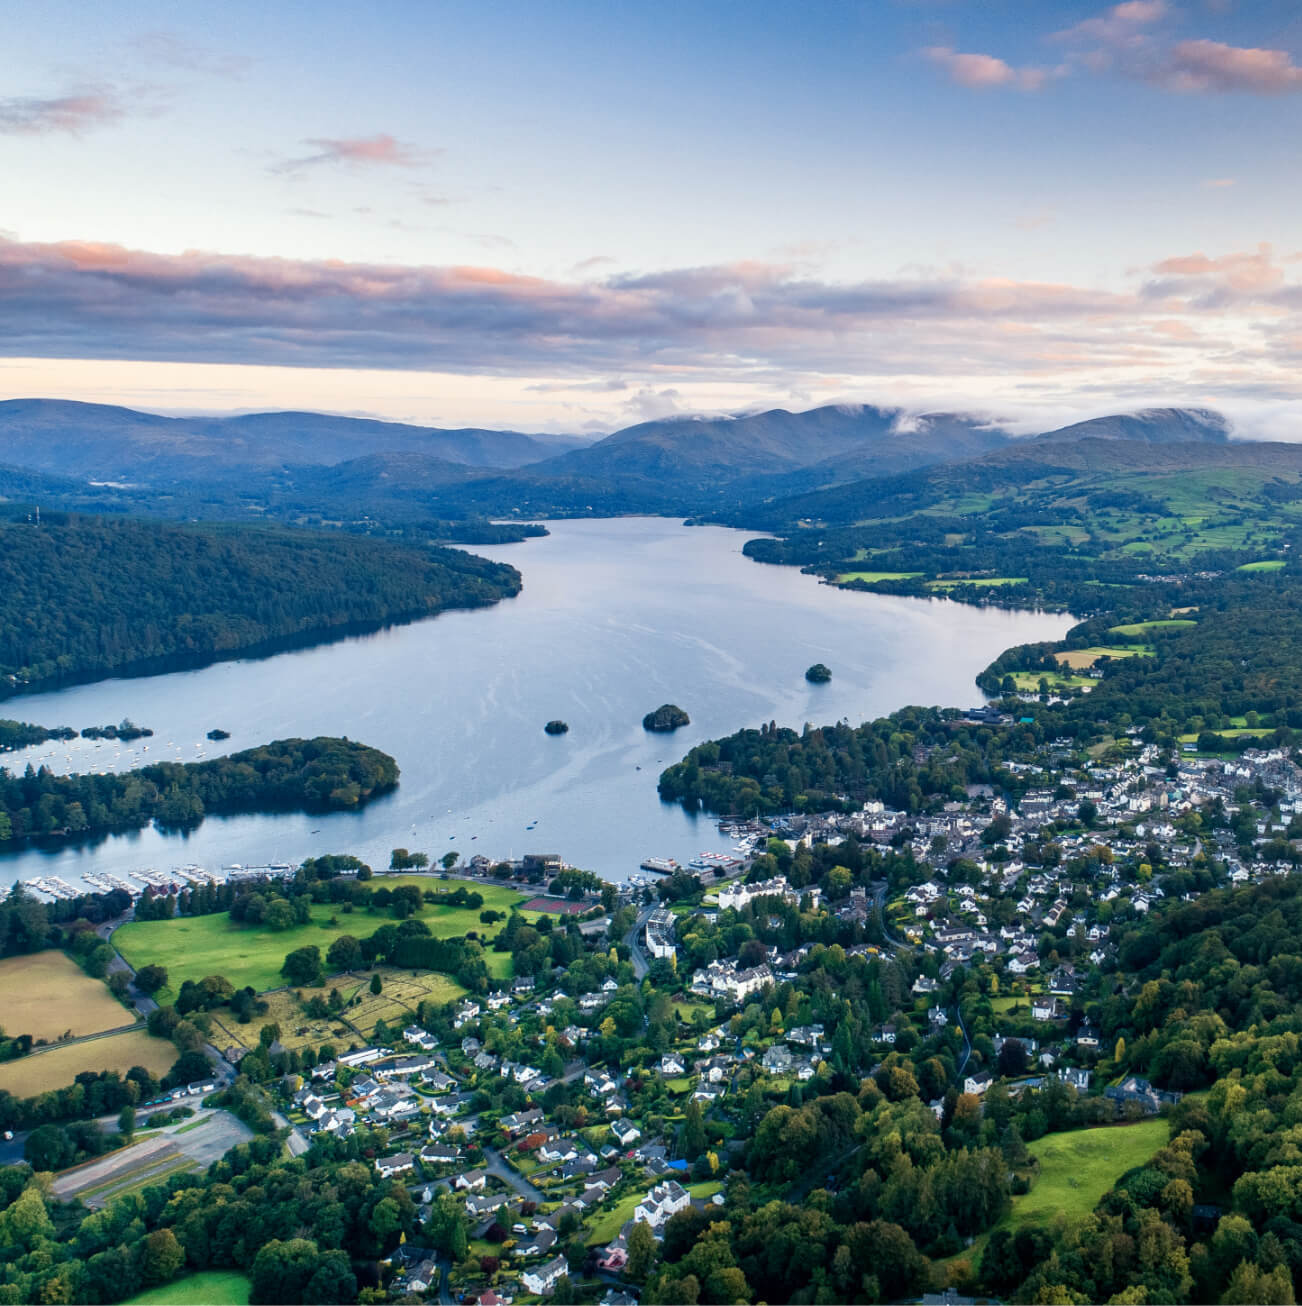 View of Bowness, Windermere